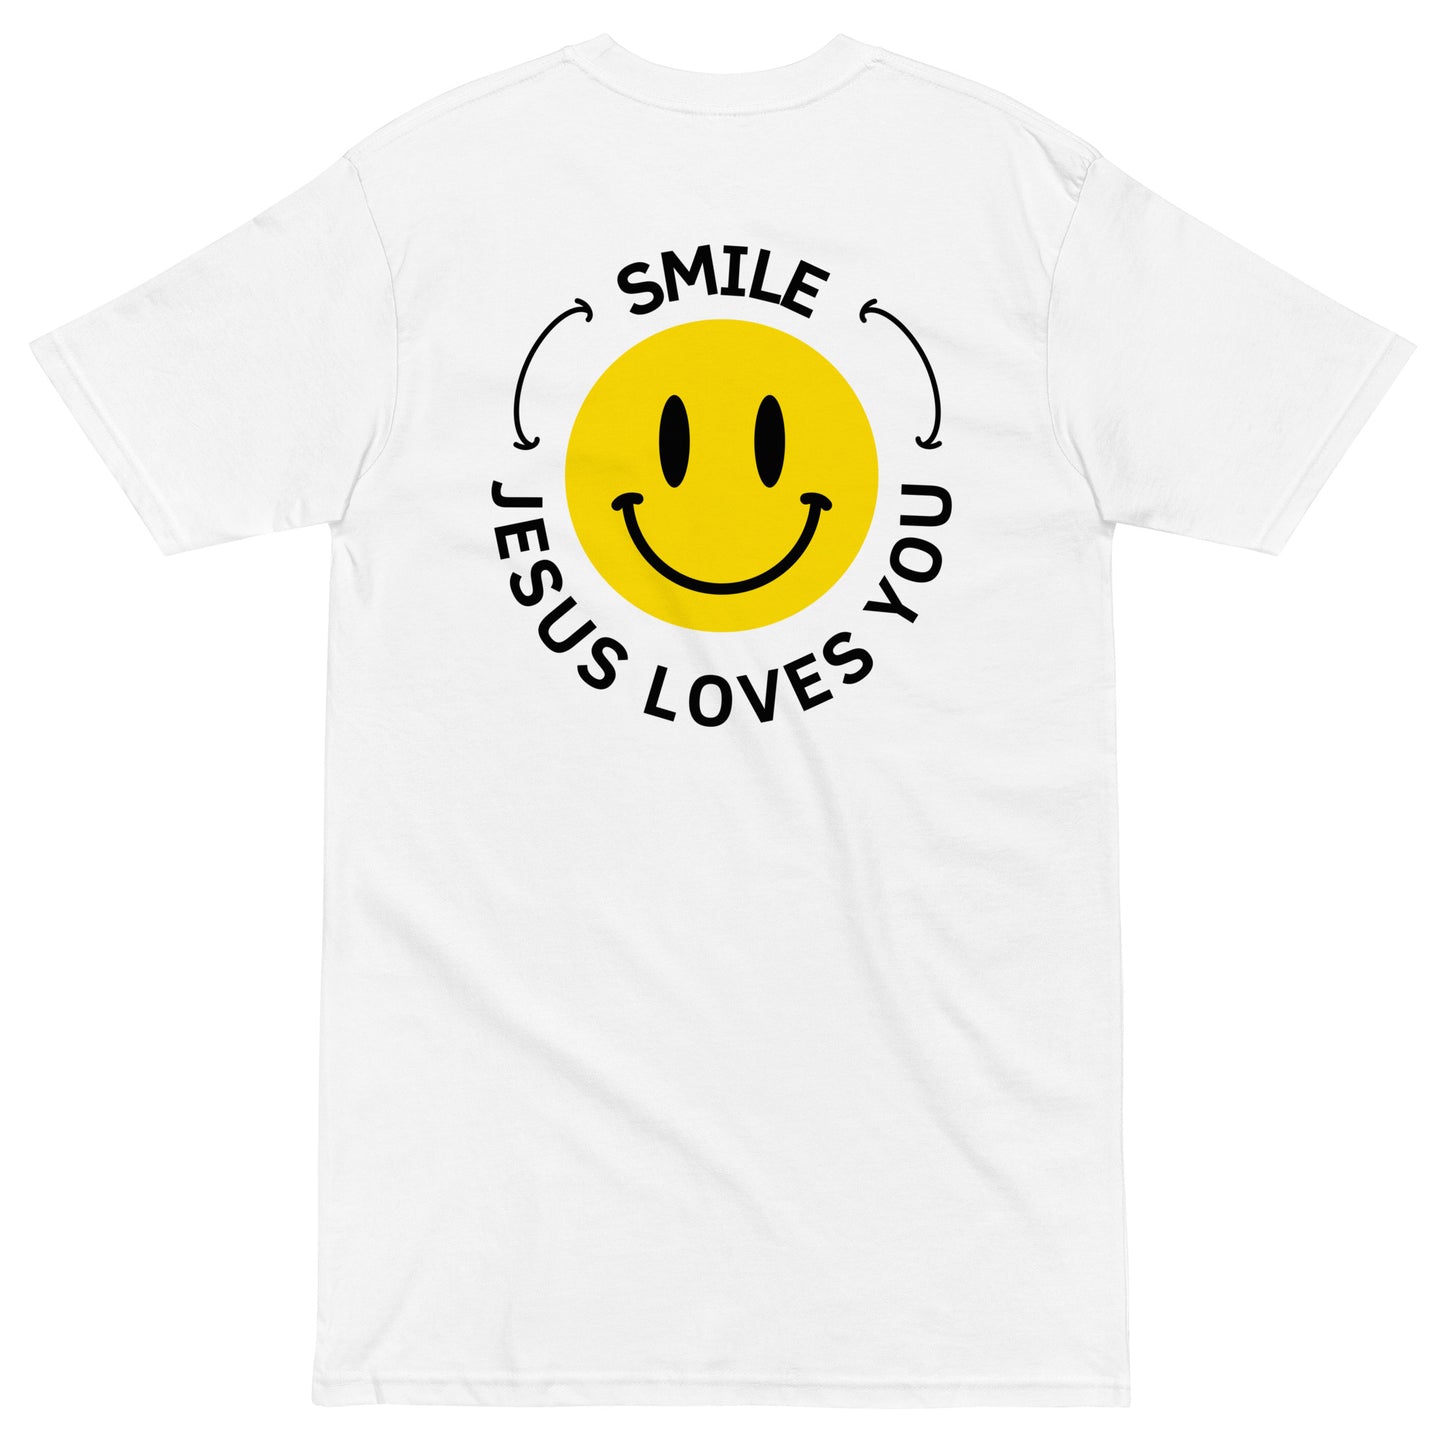 Spread Joy and Faith - 'Smile: Jesus Loves You' T-Shirt (Male Fit)